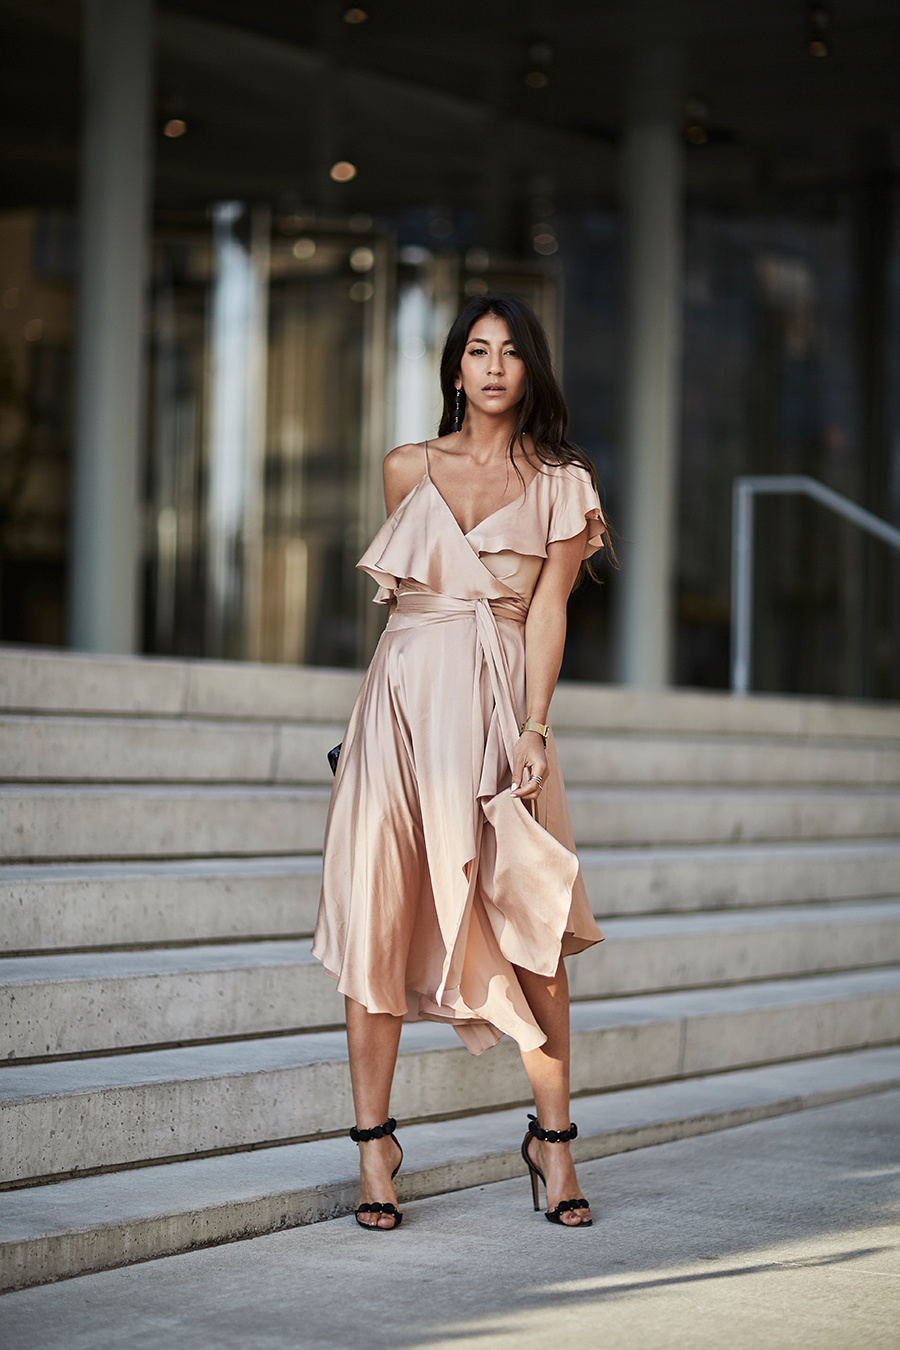 ZIMMERMANN  Sueded Asymmetric Wrap Dress resort collection show new york 2017 street style  alaia heels tassel earrings blog blogger fashion style outfit dress pretty model new york